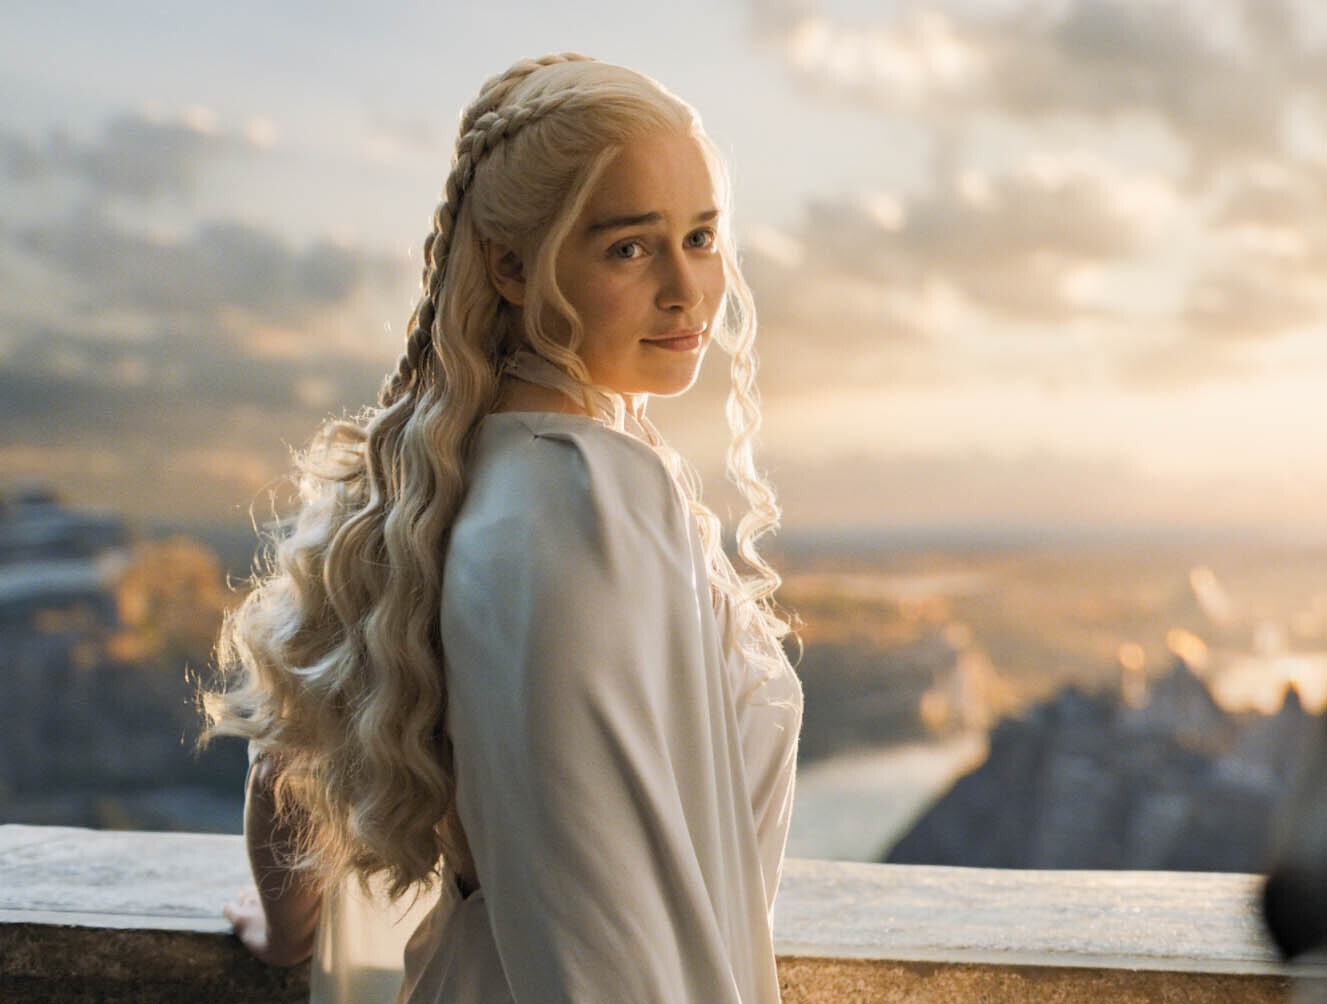 Emilia Clarke in a still from Game of Thrones (2011 - 2019).